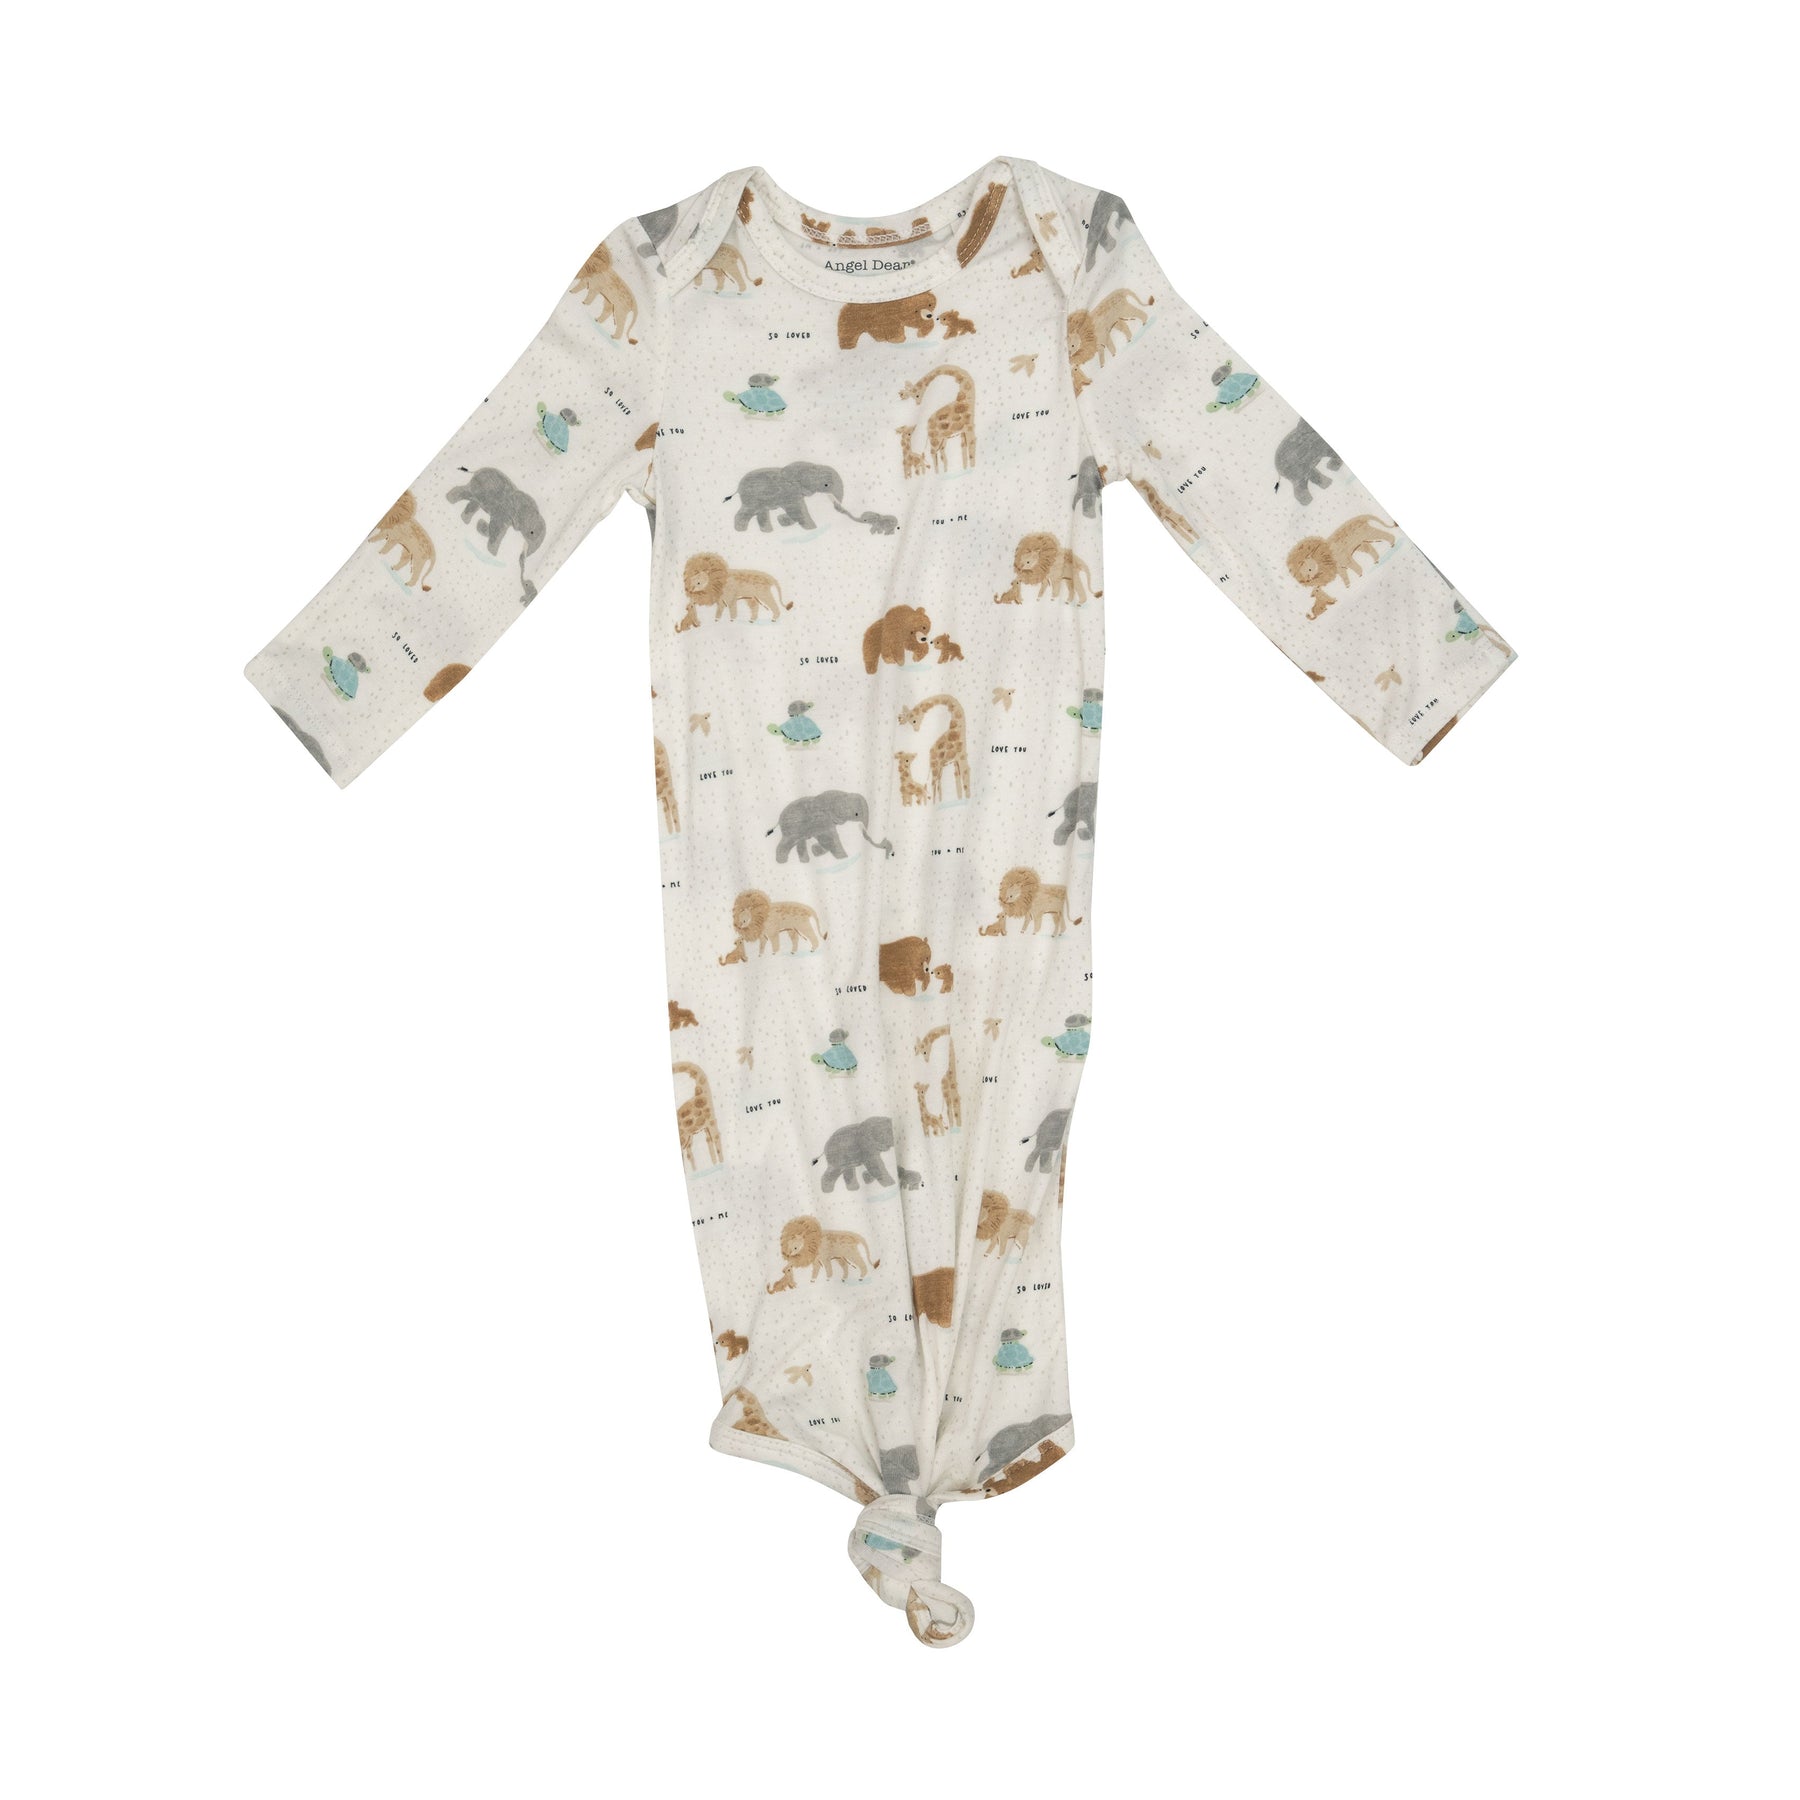 Welcome to the World Knotted Gown Pajama - Joy